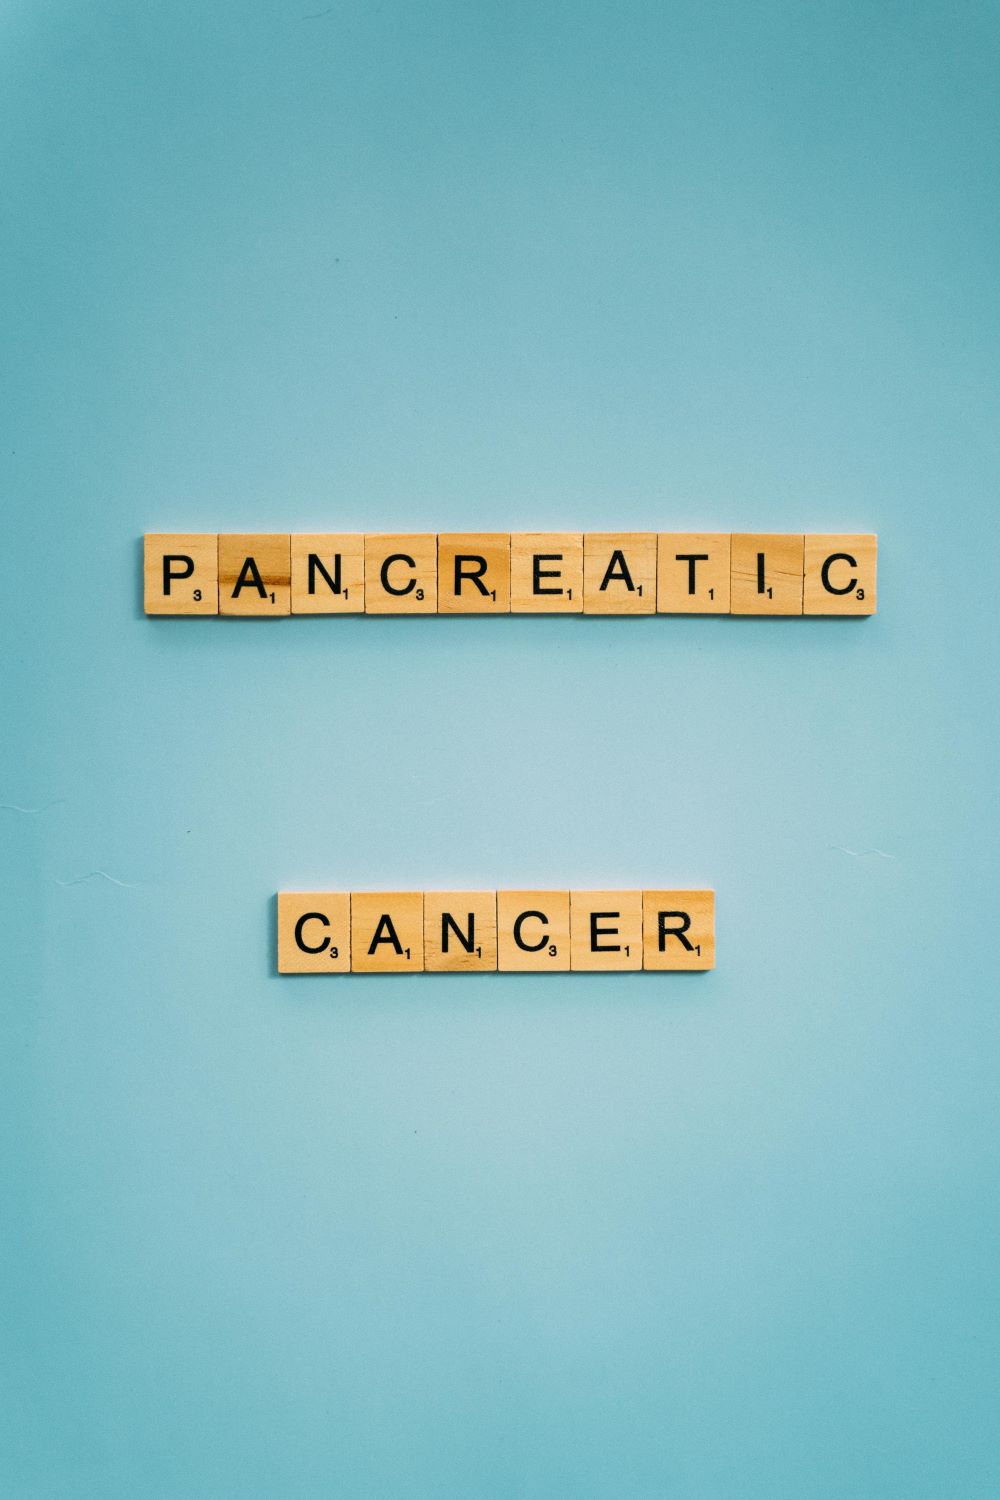 New Blood Test May Diagnosis Pancreatic Cancer Sooner